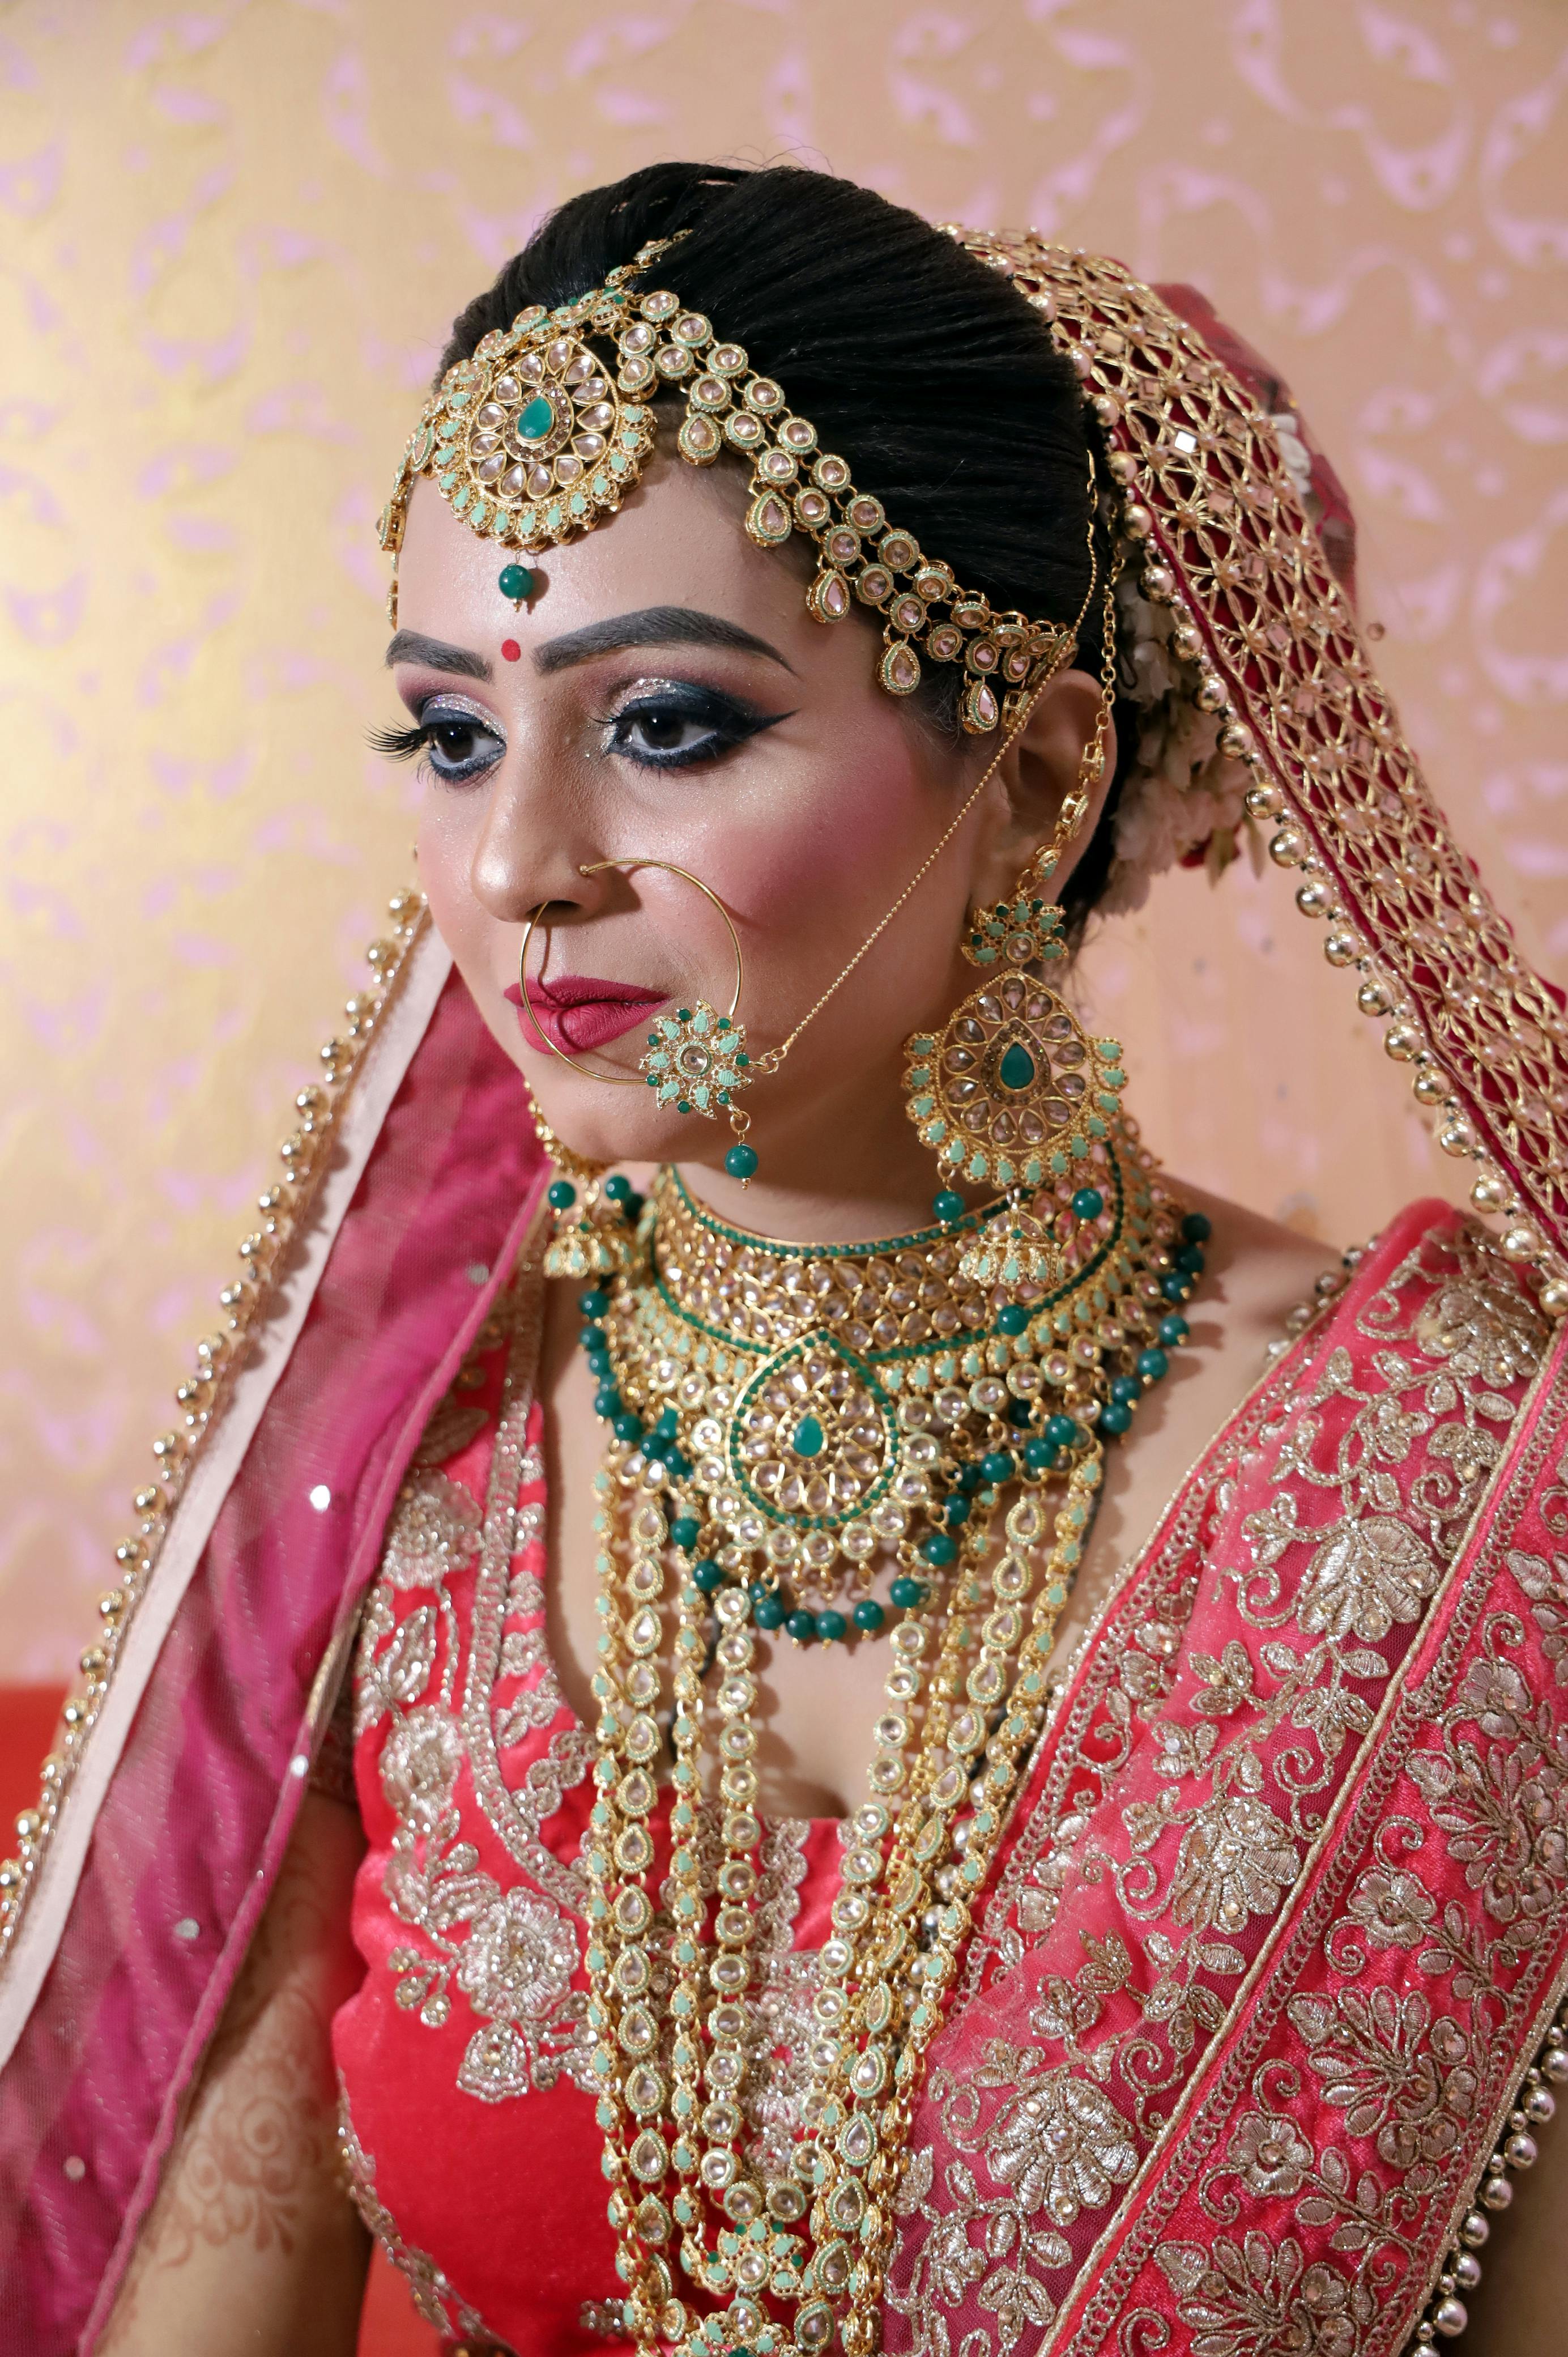 Indian Bride Photos and Images & Pictures